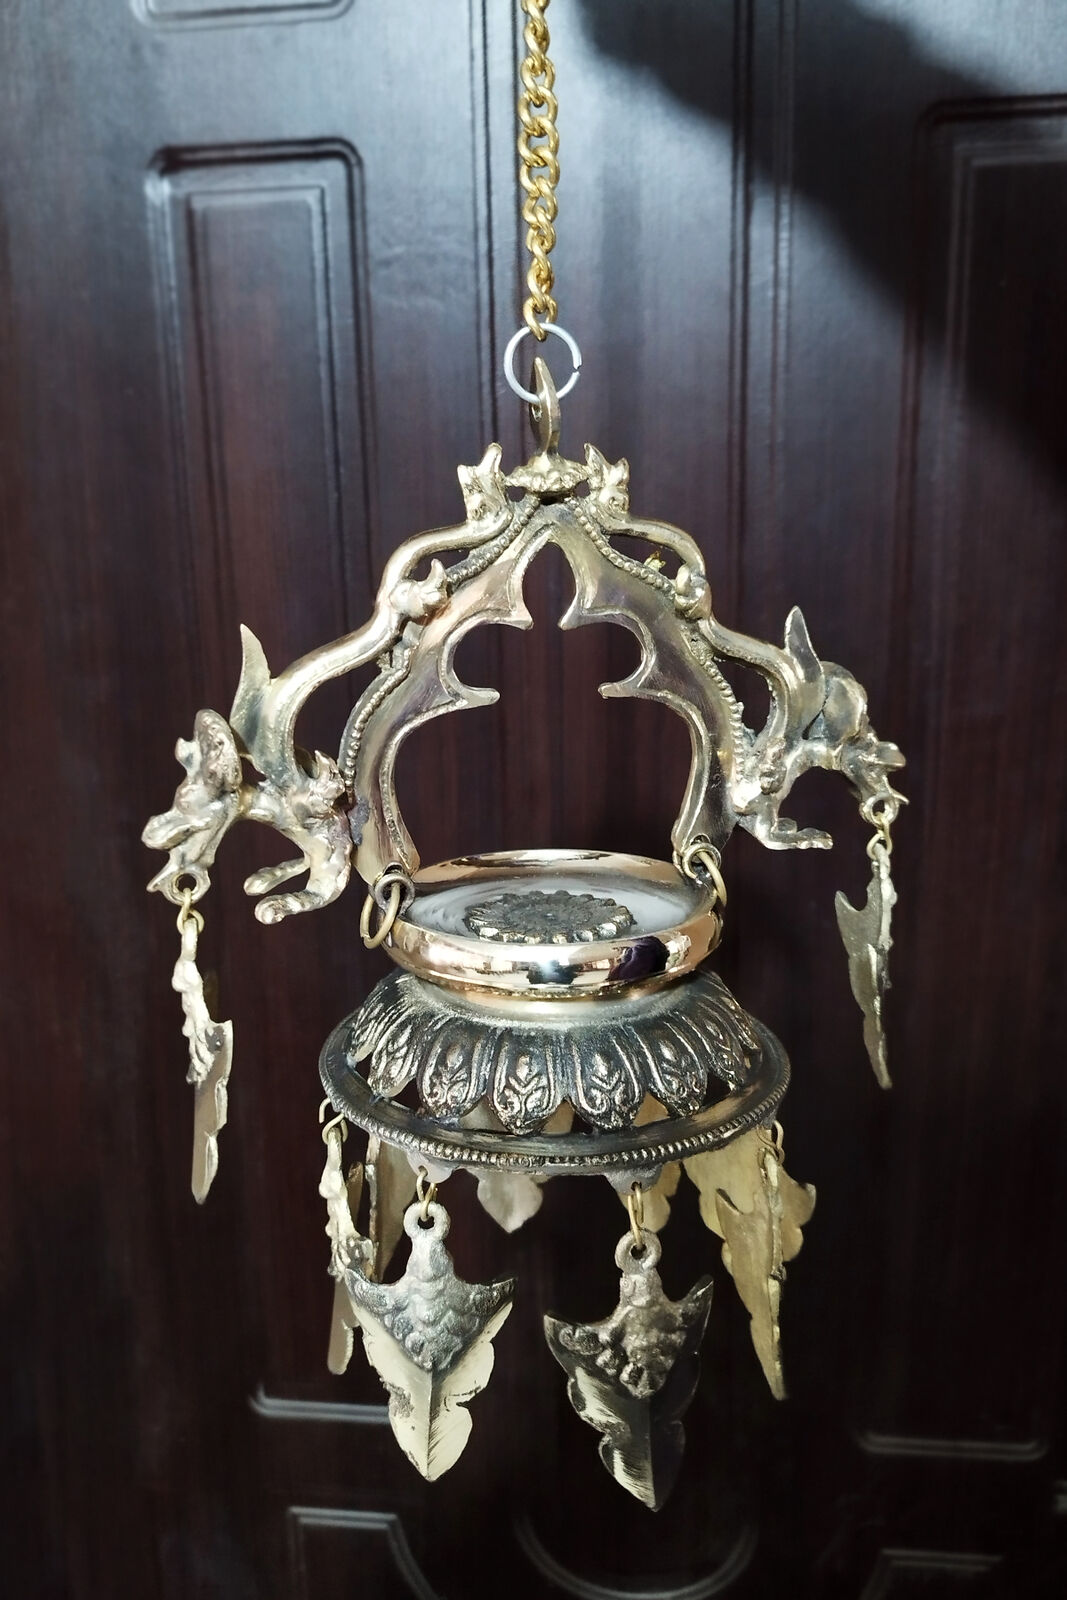 Hanging Oil Lamp From Nepal